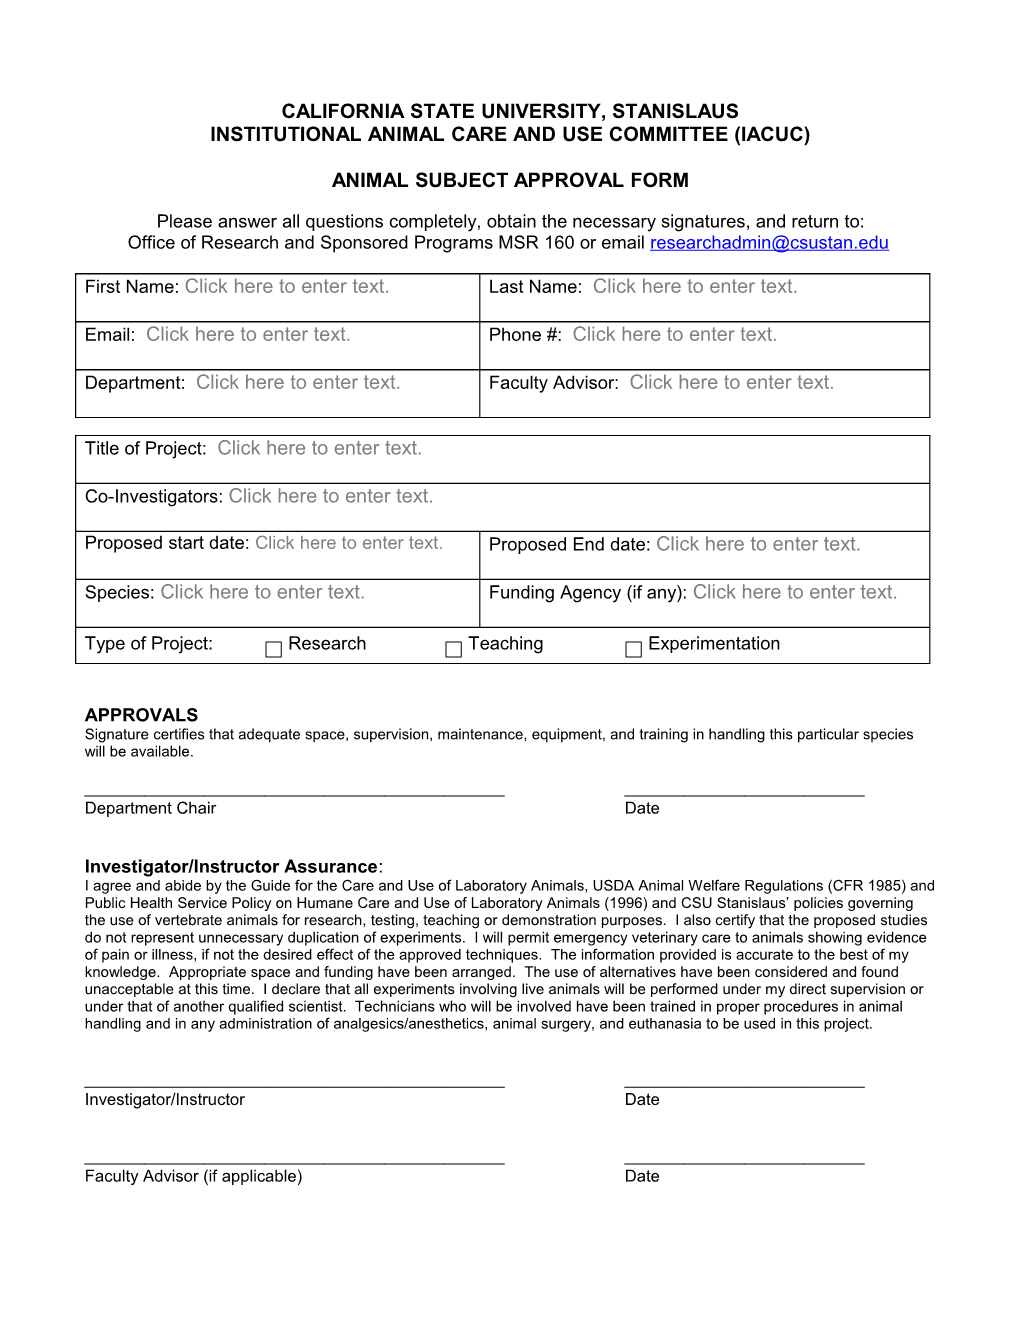 Animal Subject Approval Form